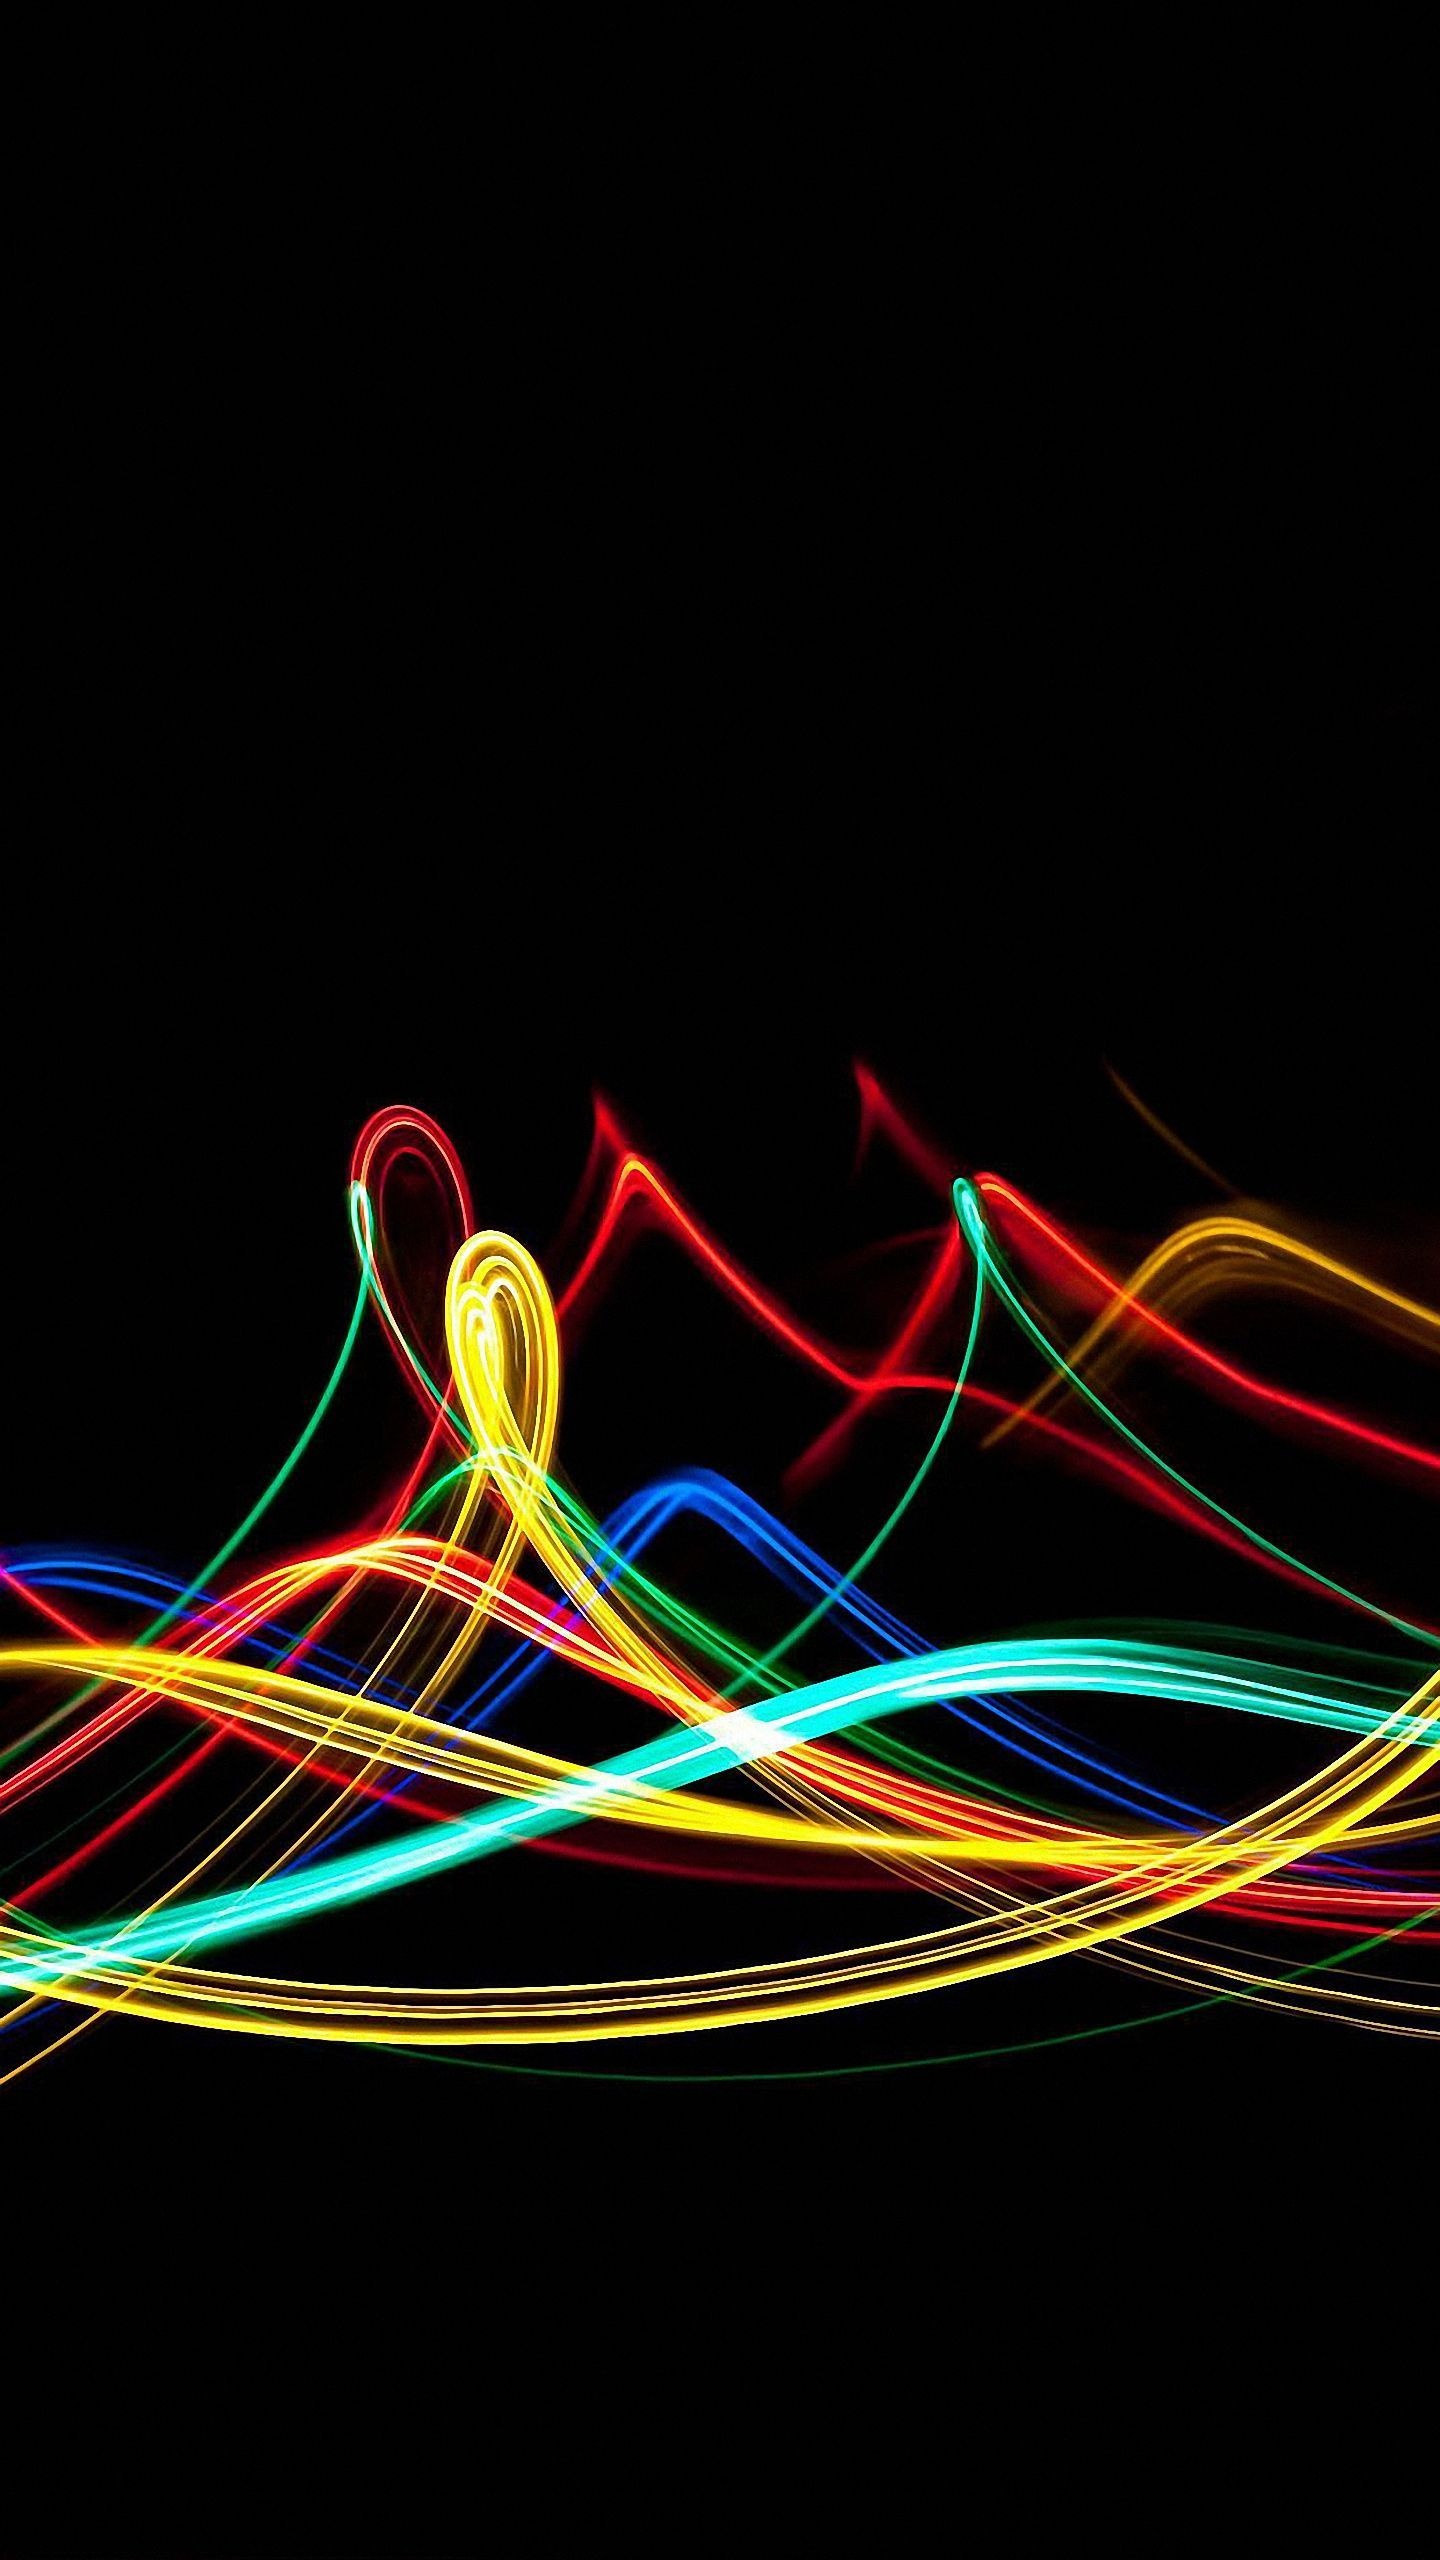 Neon mobile phone wallpaper, Eye-catching design, Unique smartphone backgrounds, Vibrant and colorful, 1440x2560 HD Phone